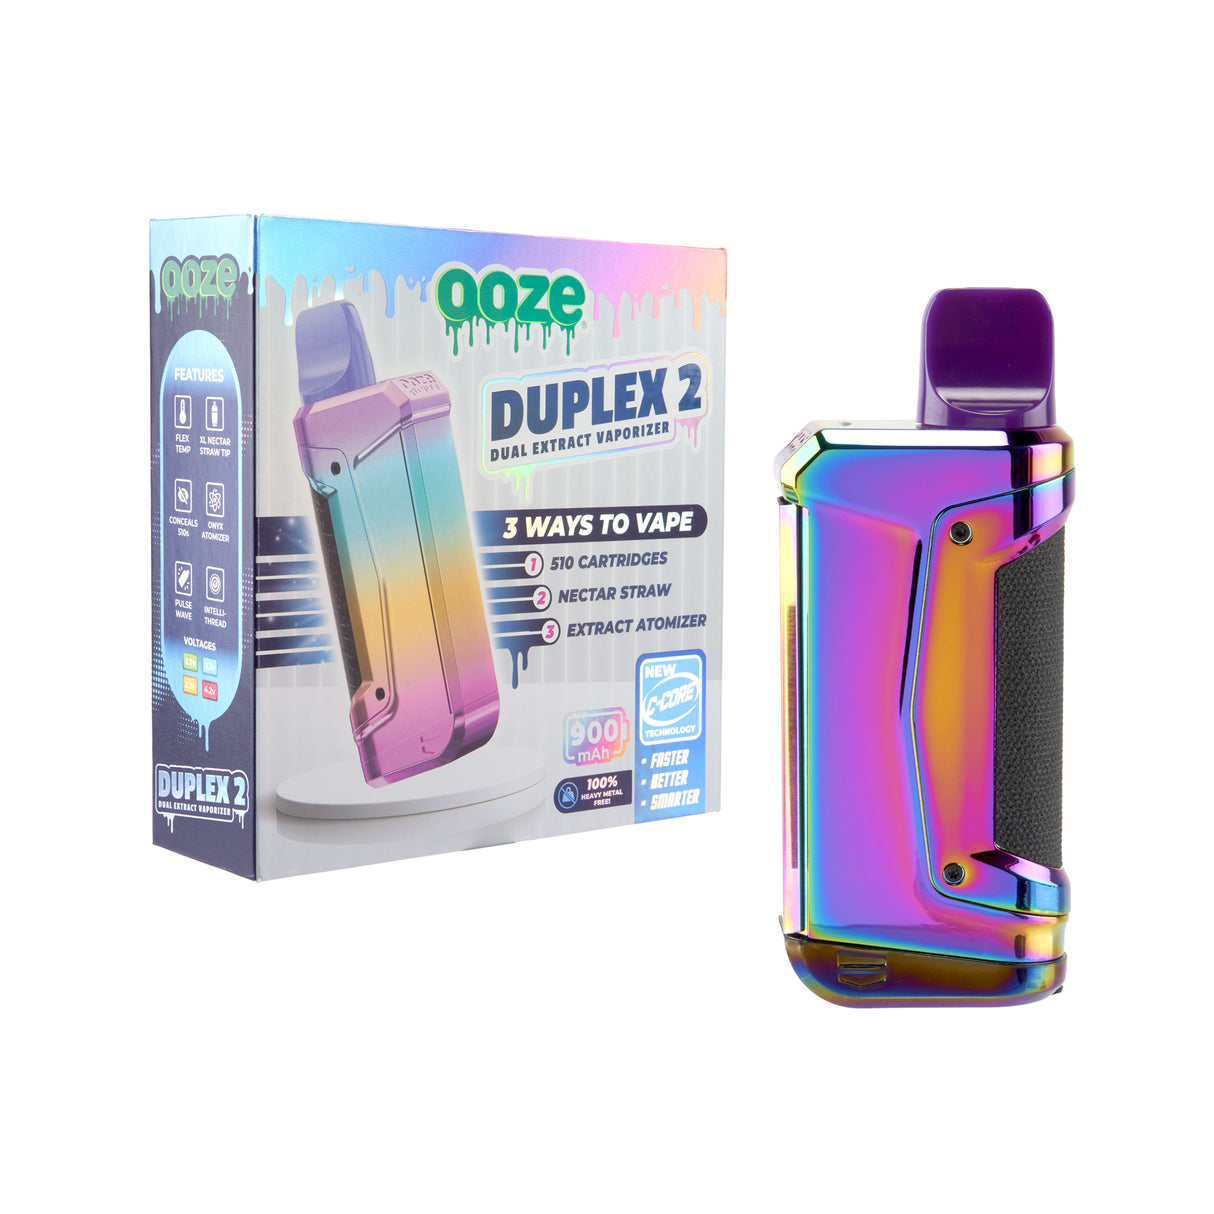 The rainbow Ooze Duplex 2 extract vape is shown next to the box